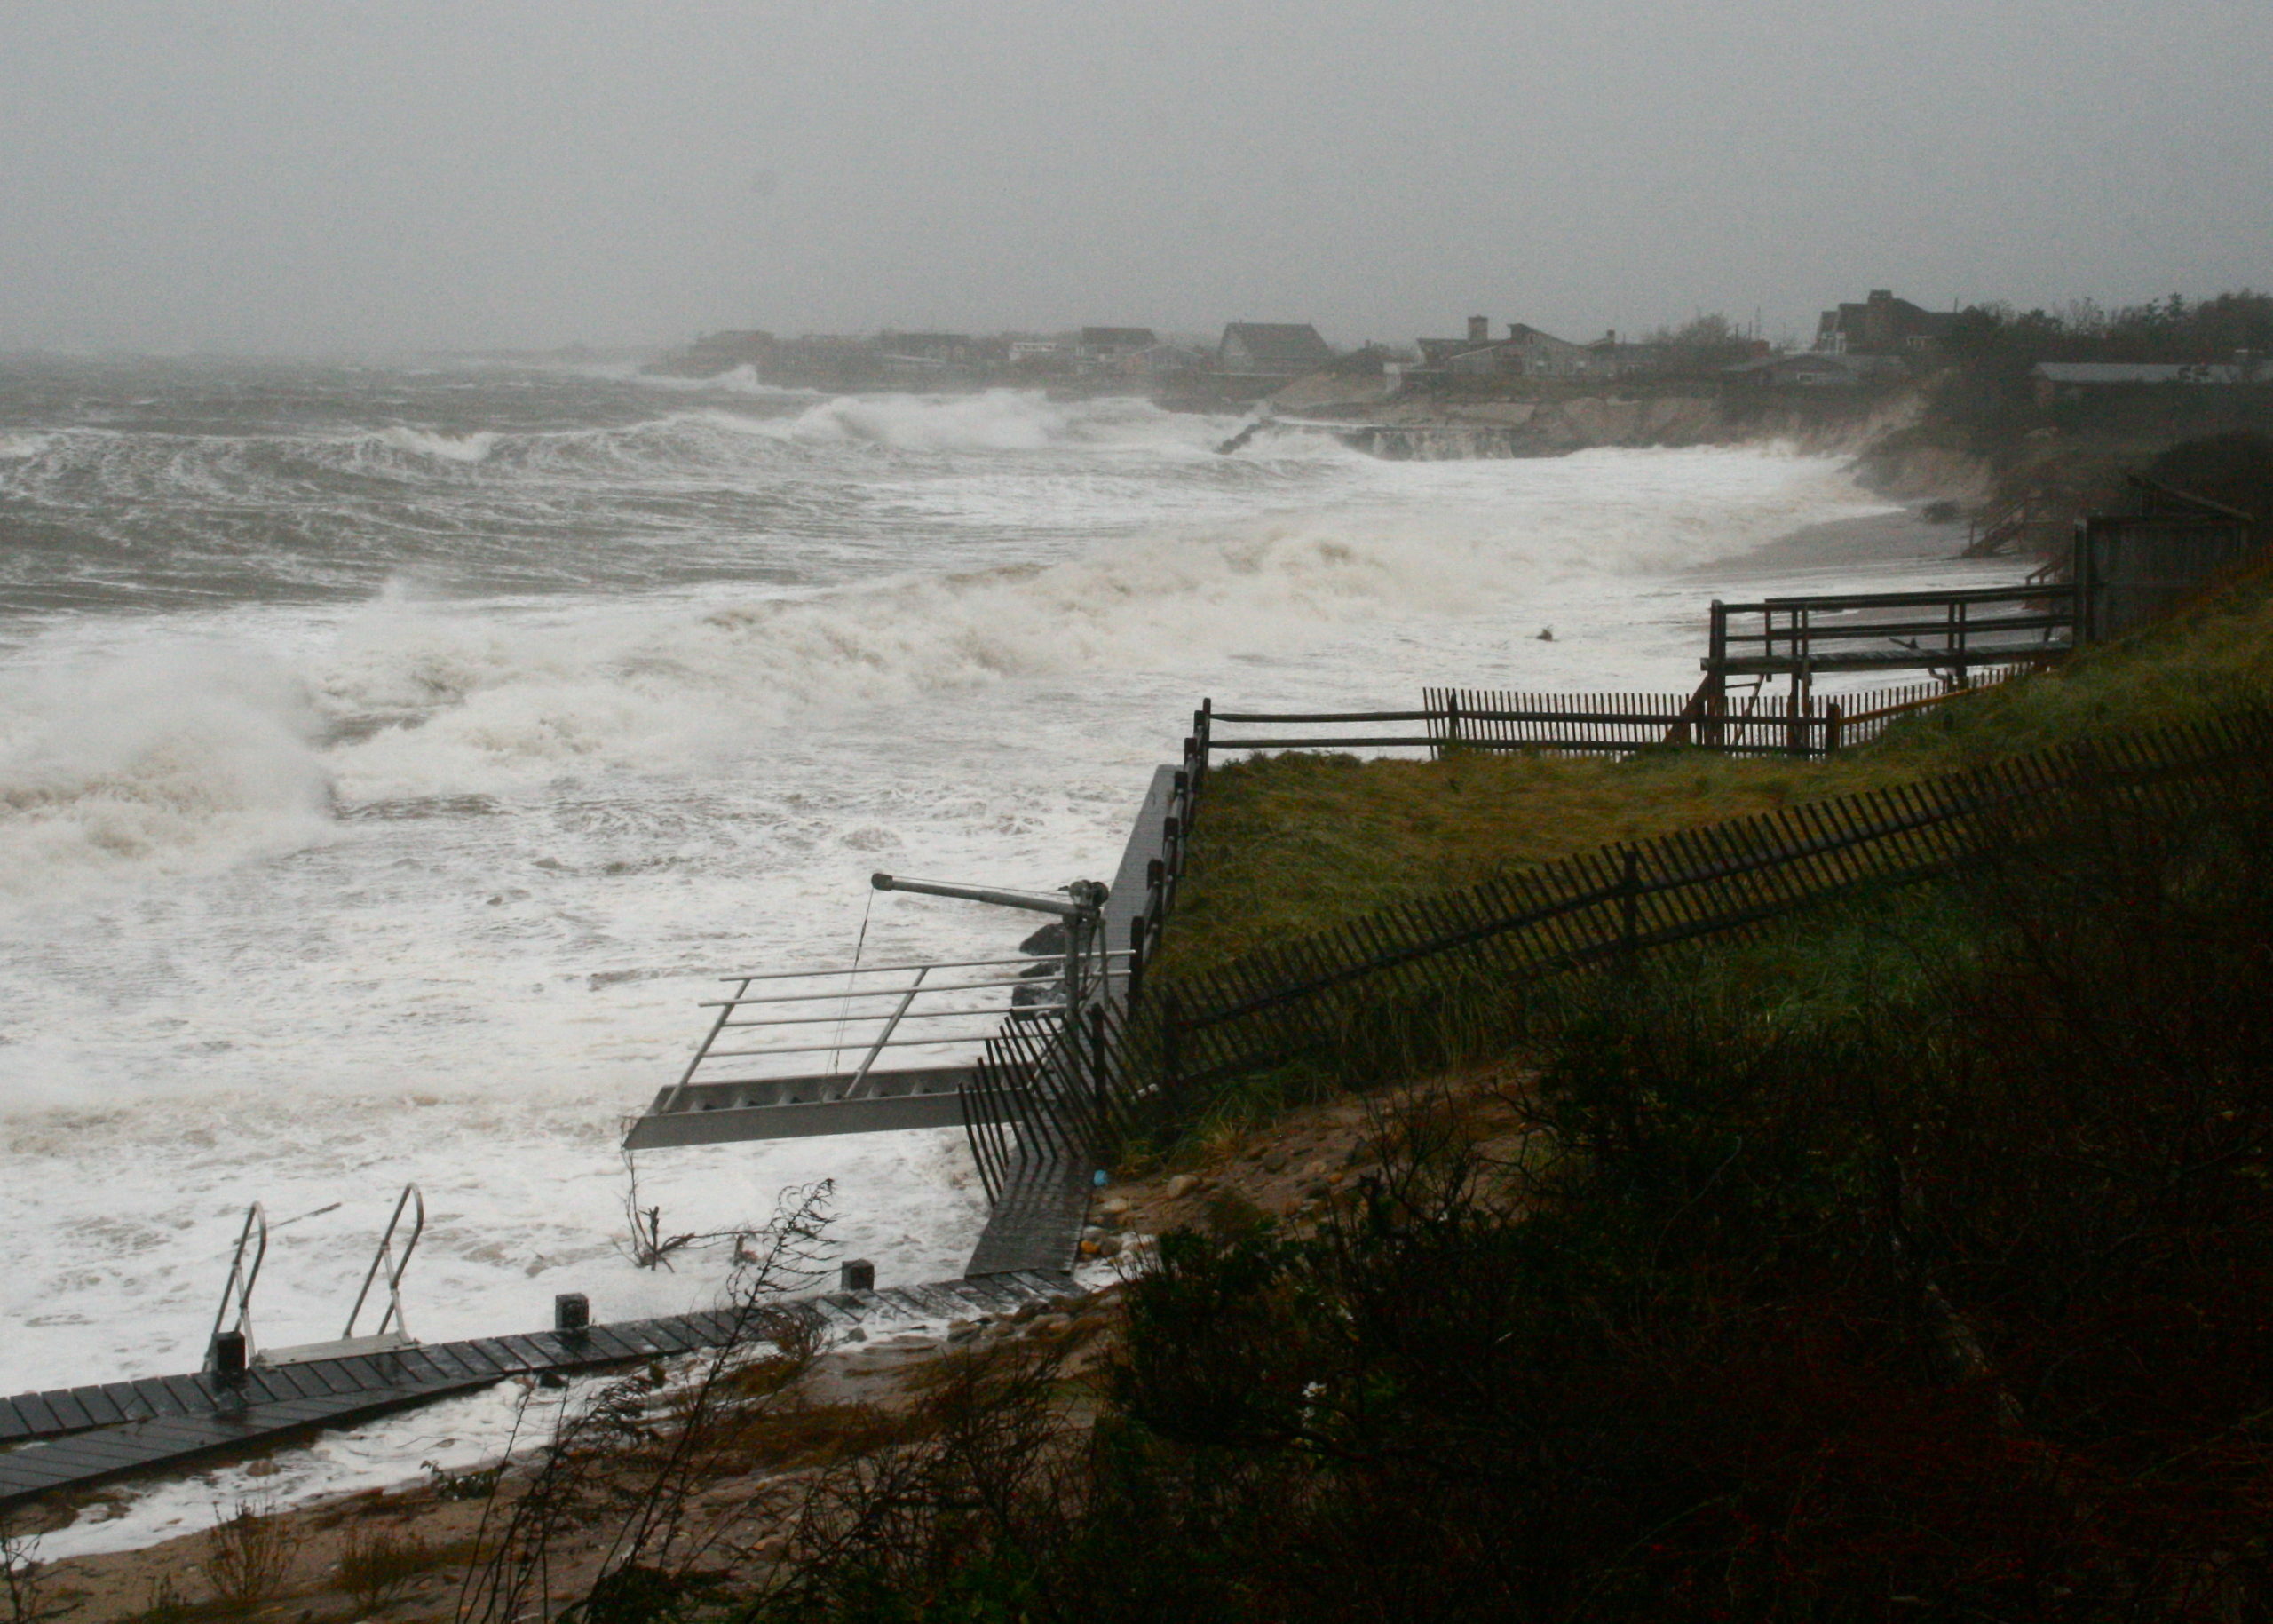 Soundview Drive in Montauk is pummeled by waves during a storm.